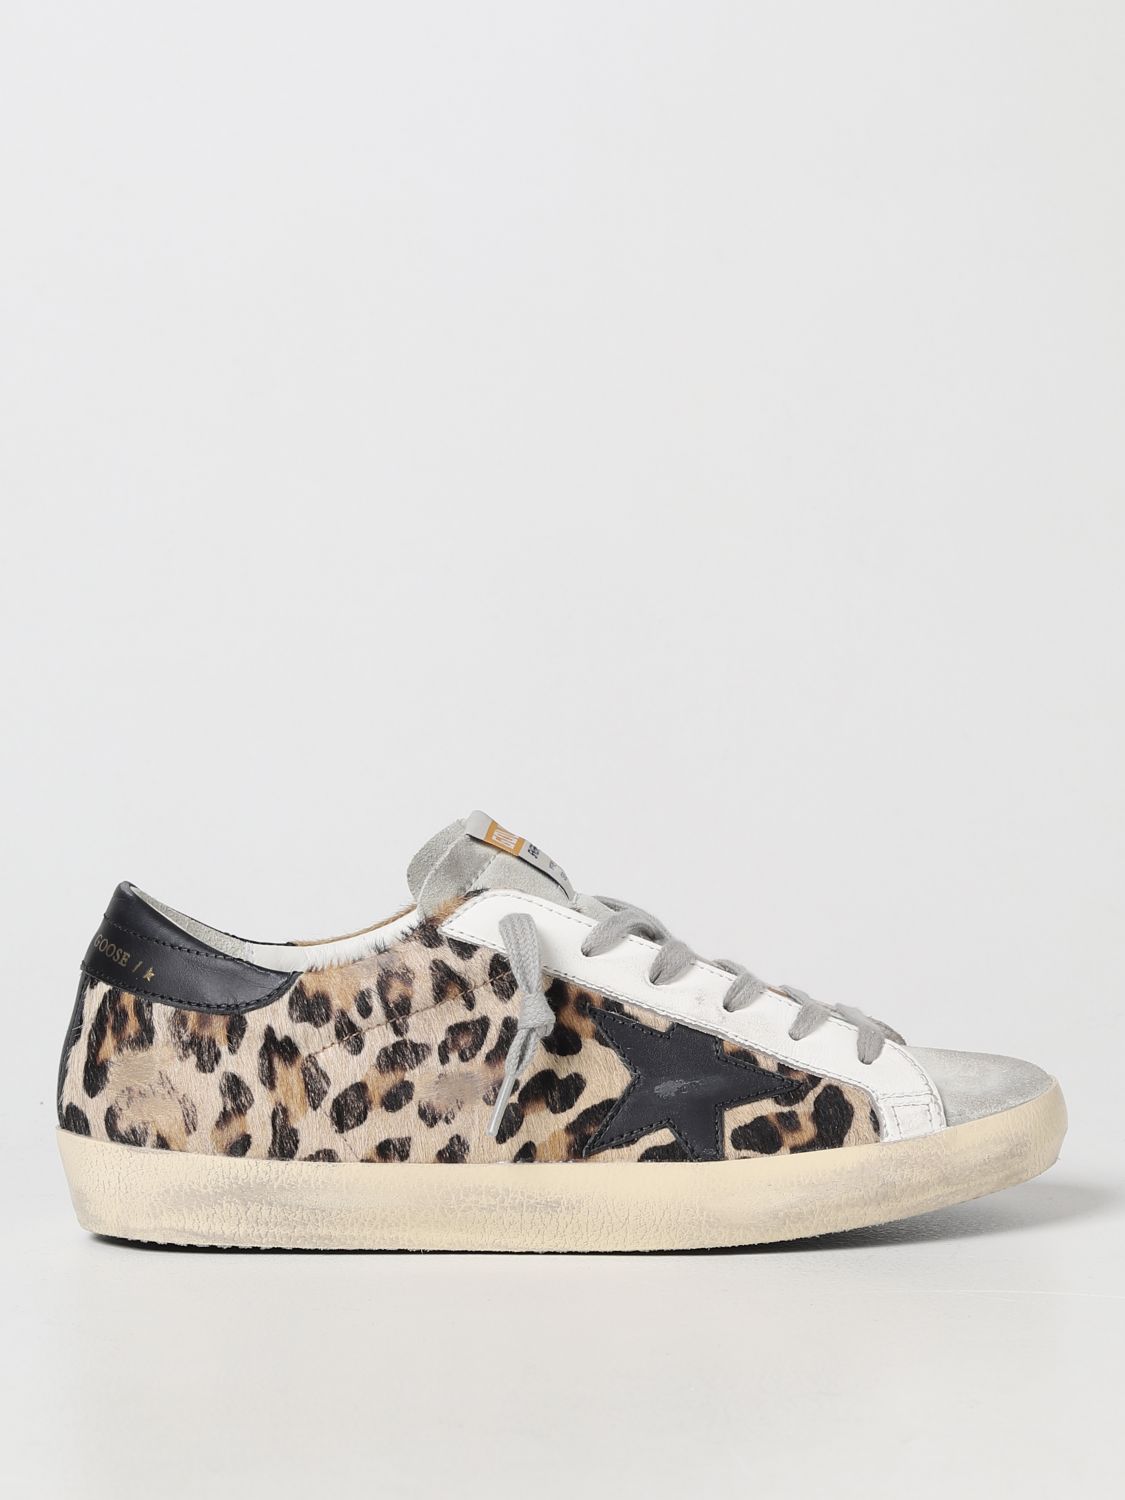 GOLDEN GOOSE SUPER-STAR GOLDEN GOOSE SNEAKERS IN USED ANIMALIER PRINT PONY LEATHER,376583022